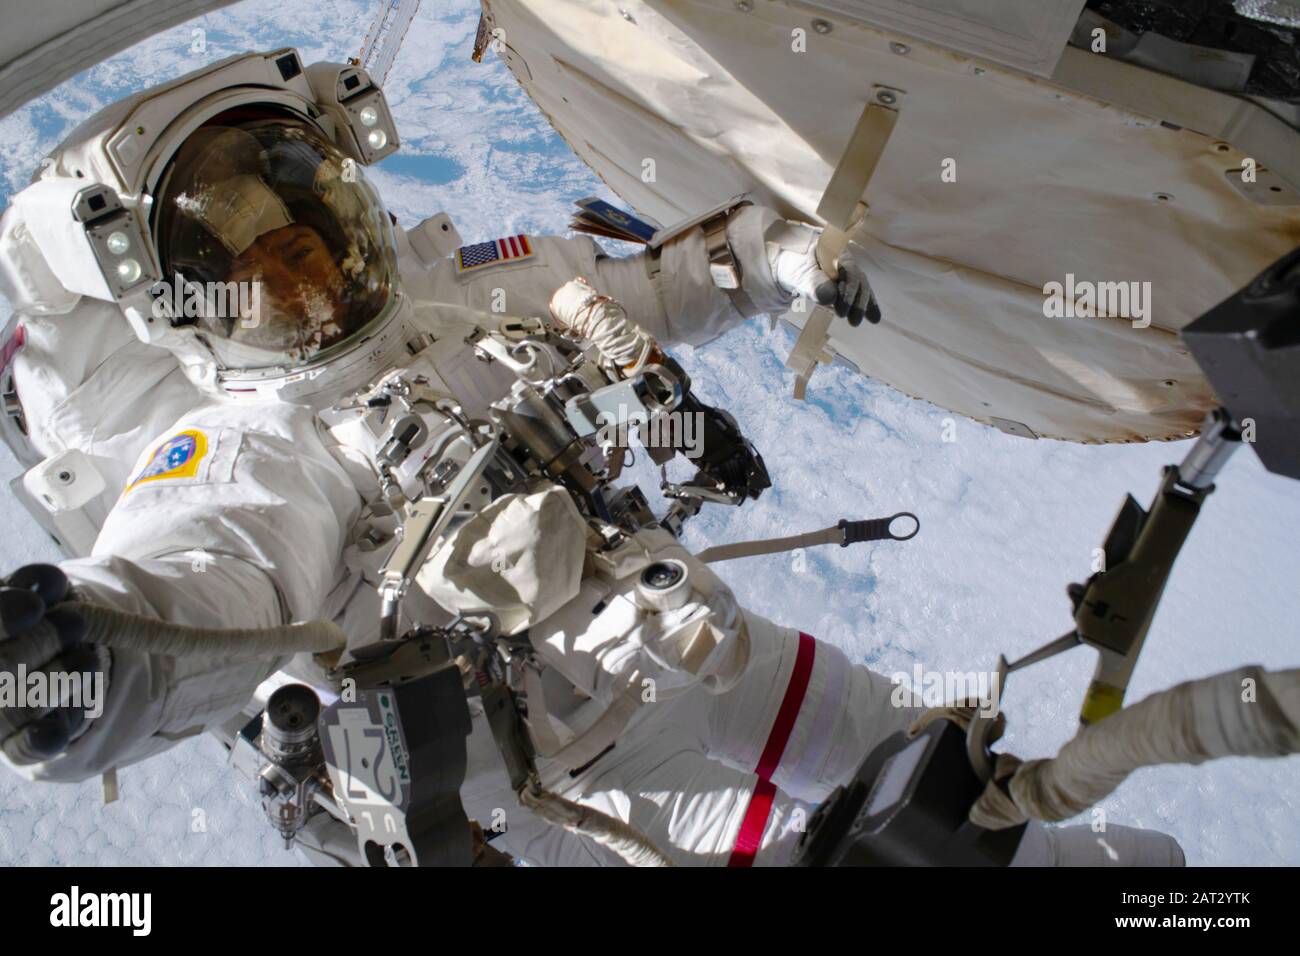 ISS - 20 Jan 2020 - NASA astronaut Jessica Meir is pictured during a spacewalk to finalize upgrading power systems on the International Space Station' Stock Photo